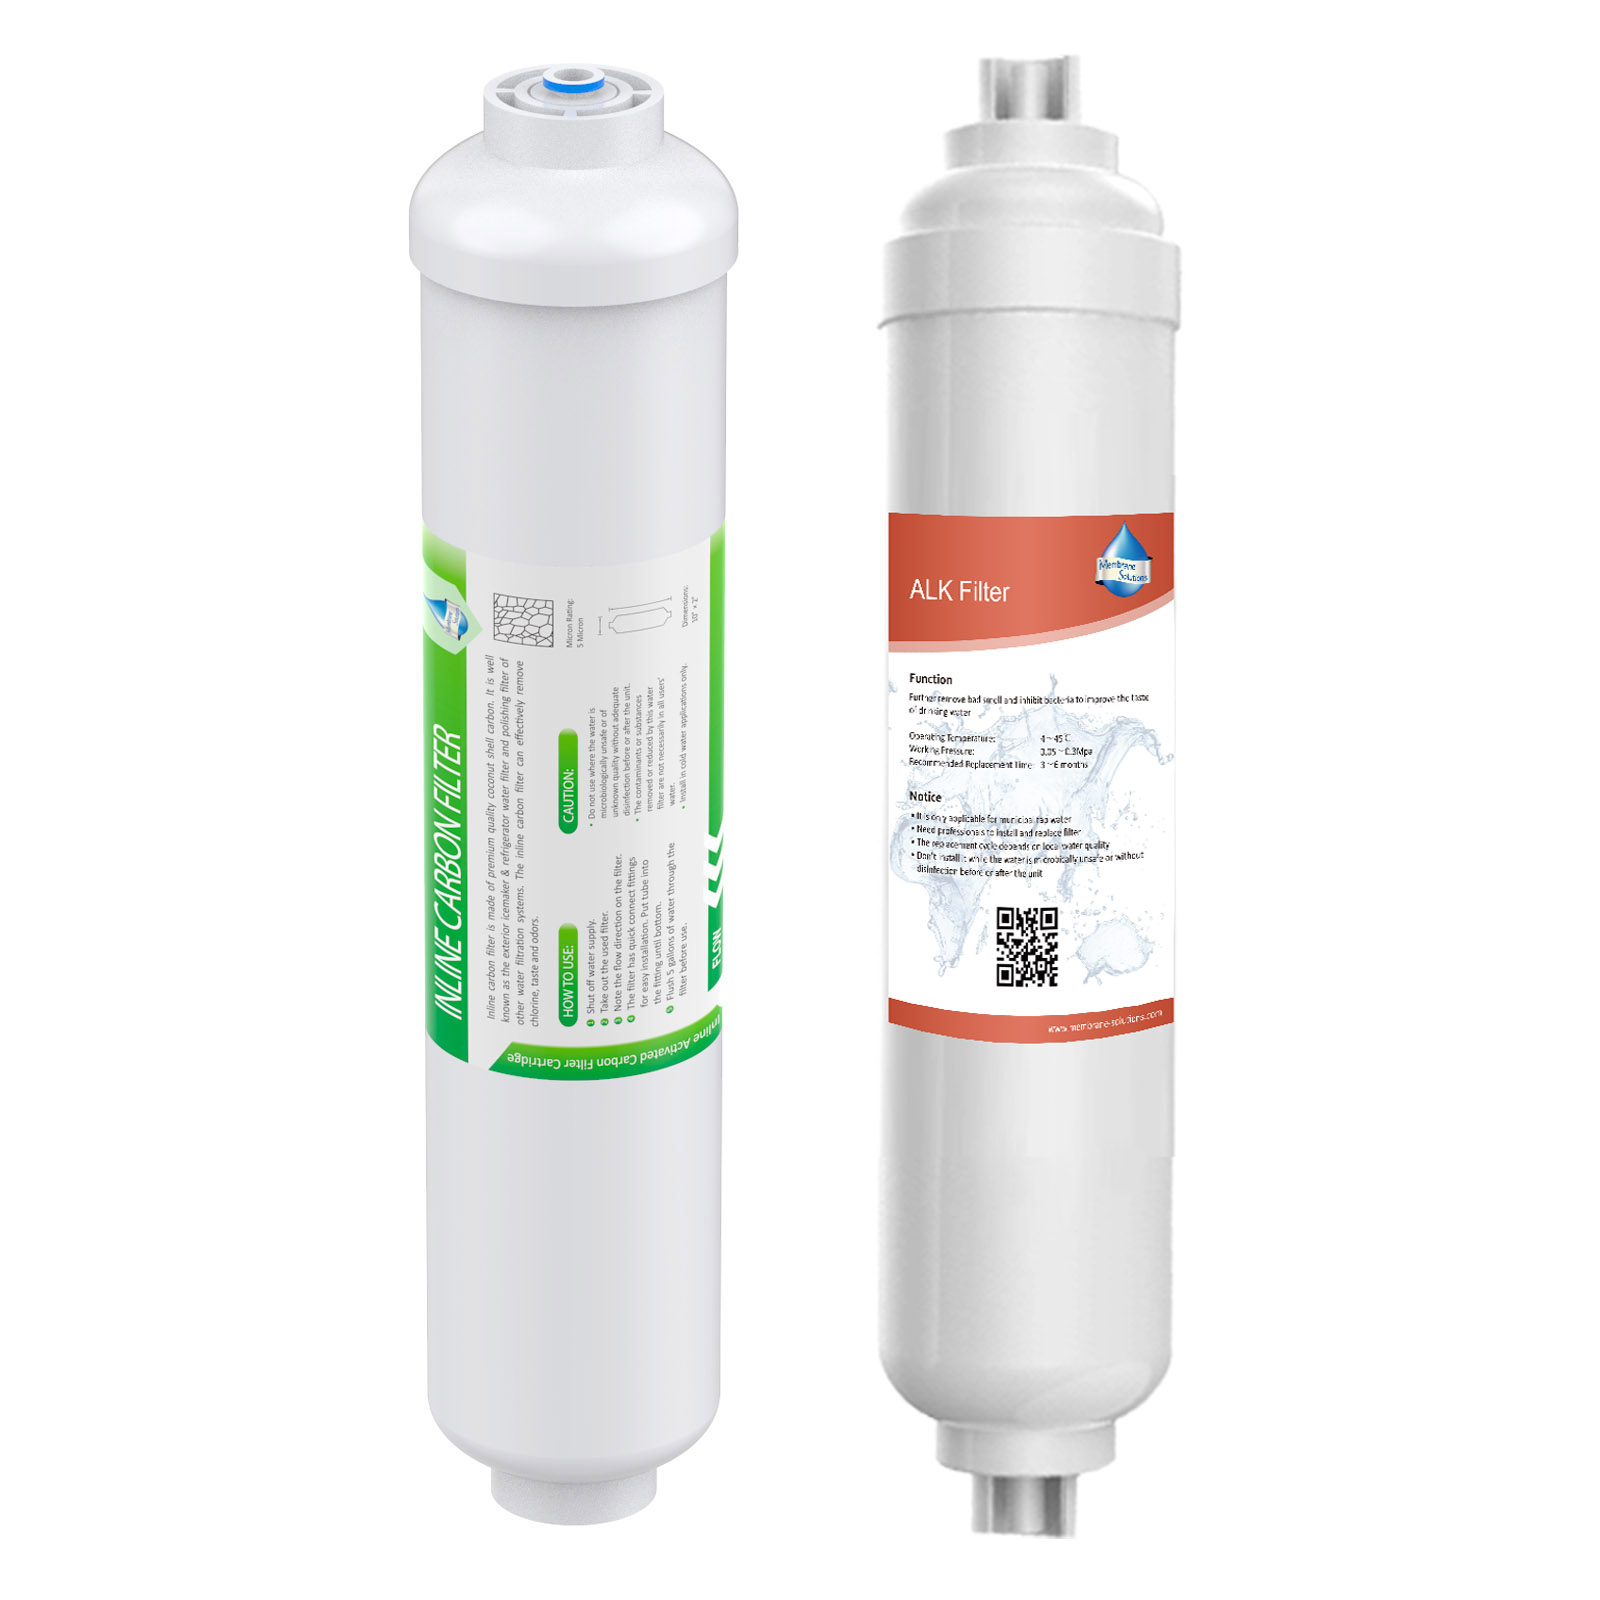 FILTER T33 Reverse Osmosis Systems fits All Housings,Replacement Water Cartridges for Drinking Water 